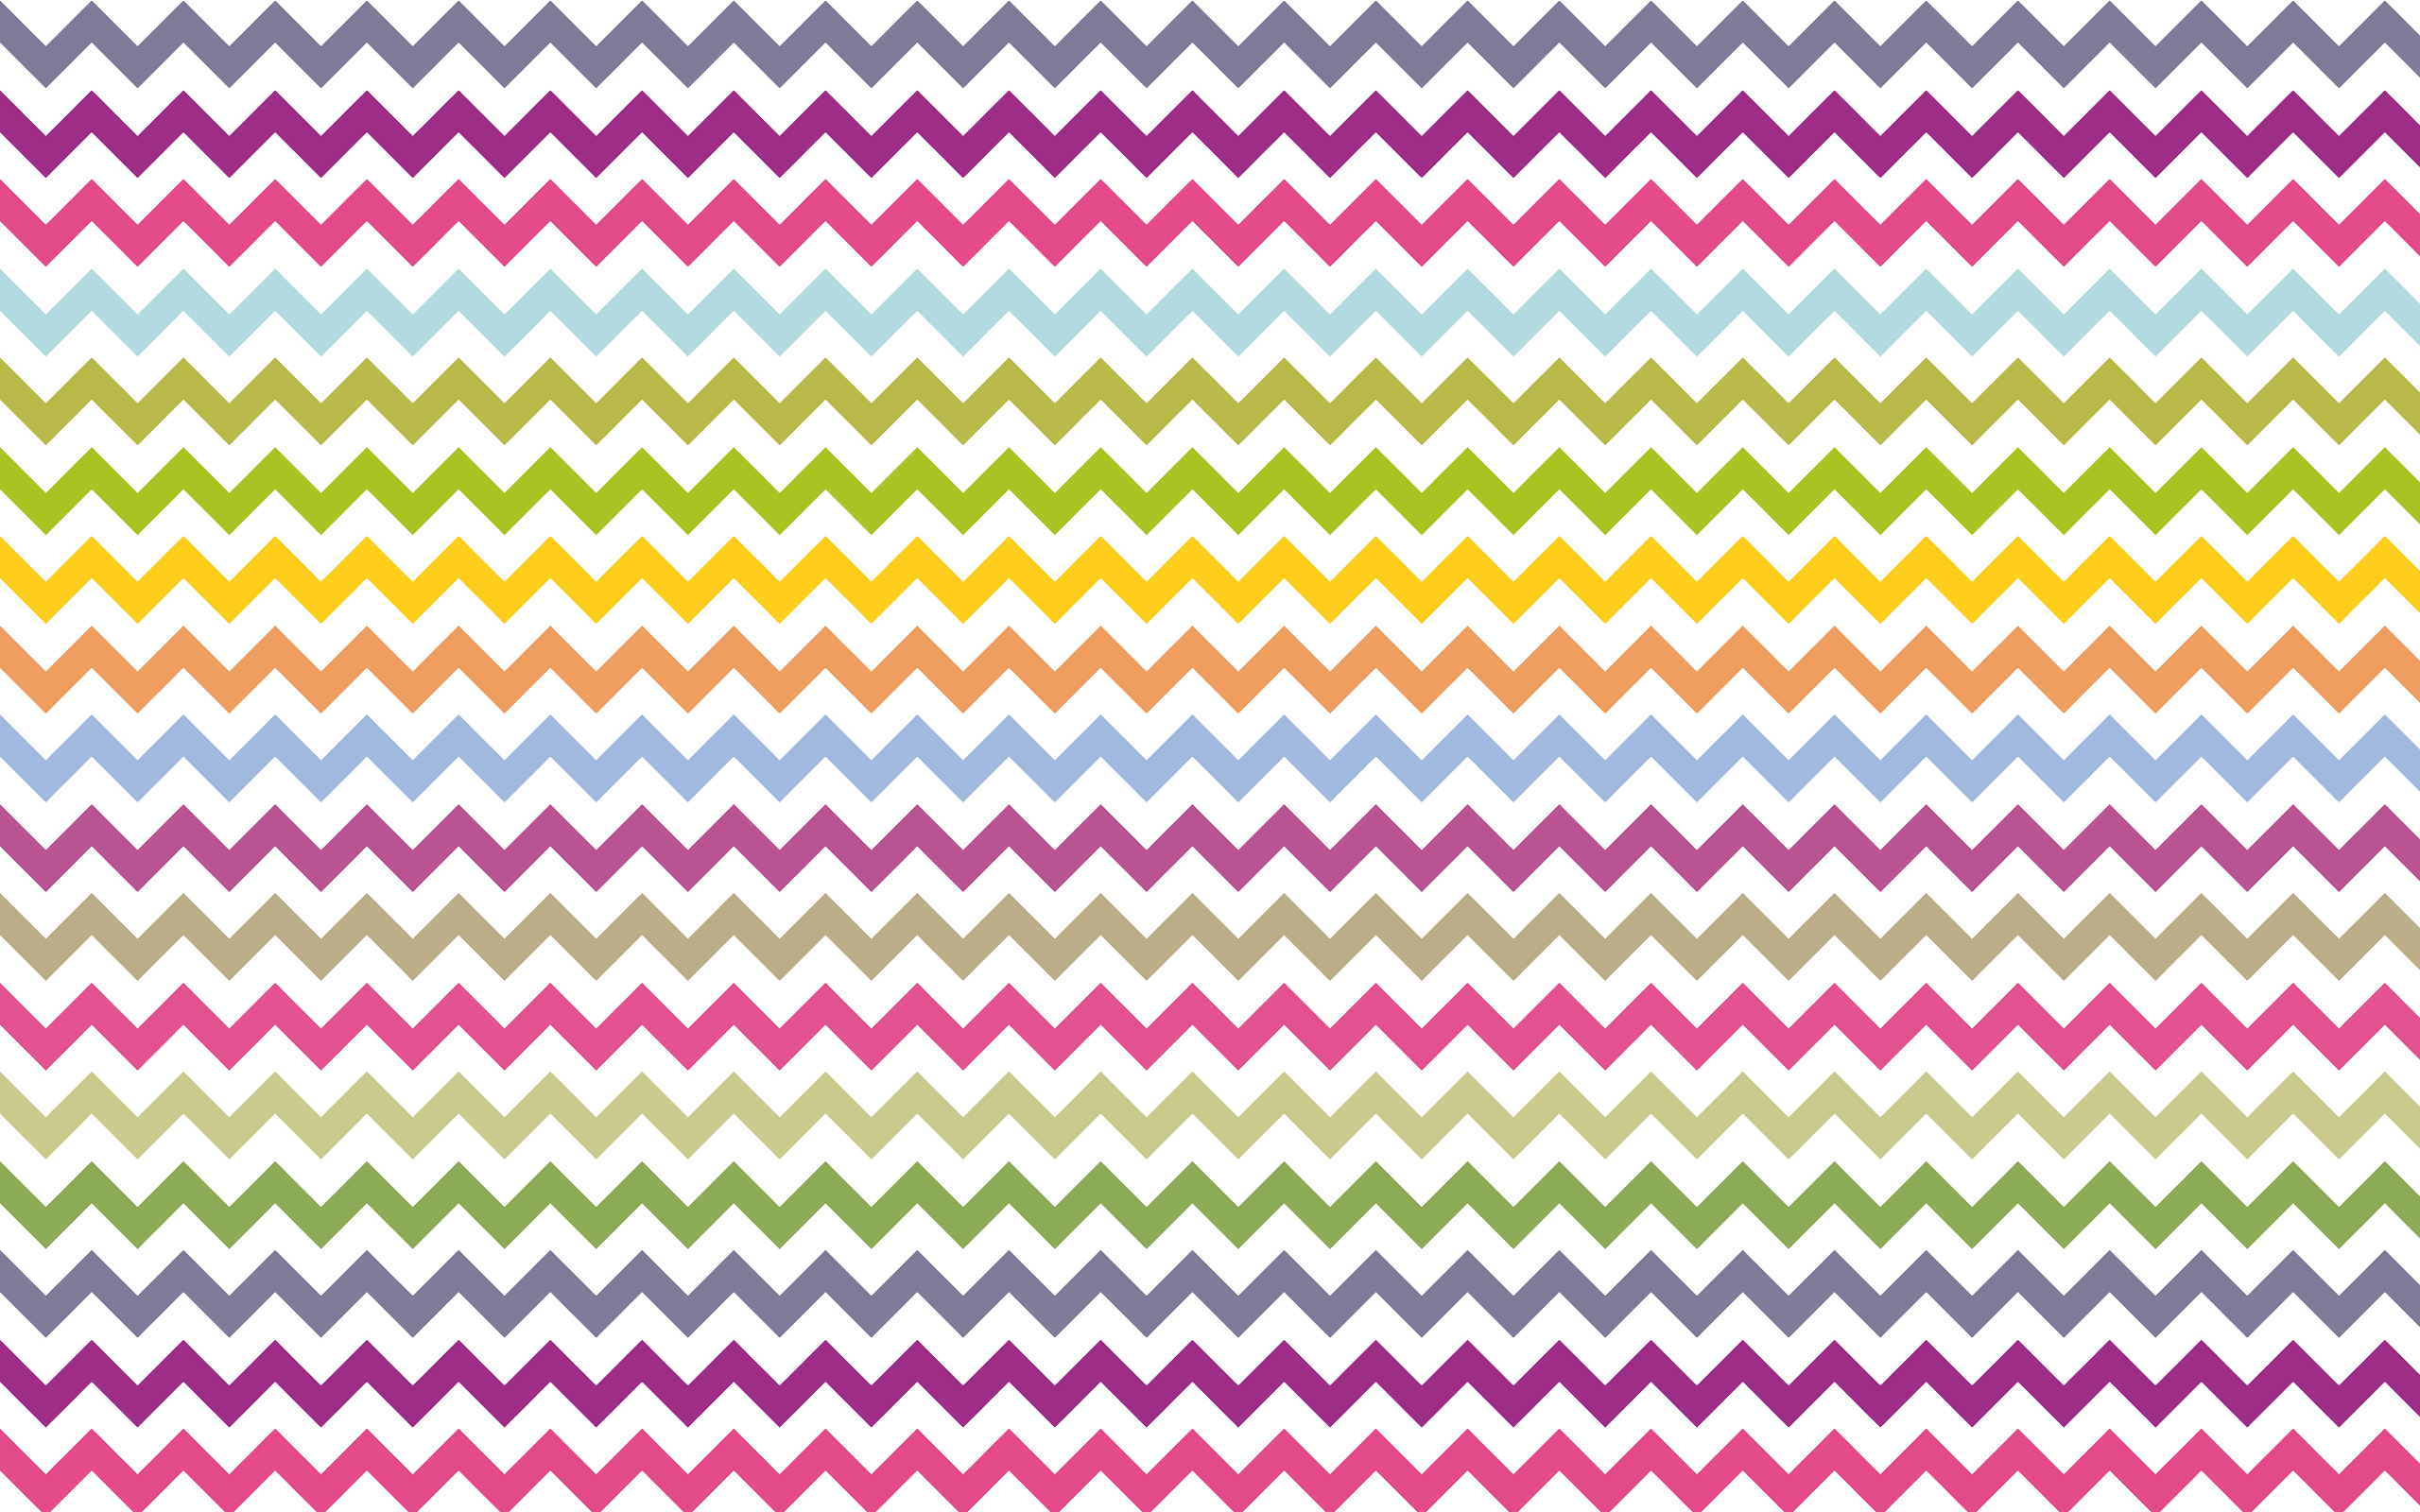 Lets see those chevrons With this challenge we want to see all the 2560x1600